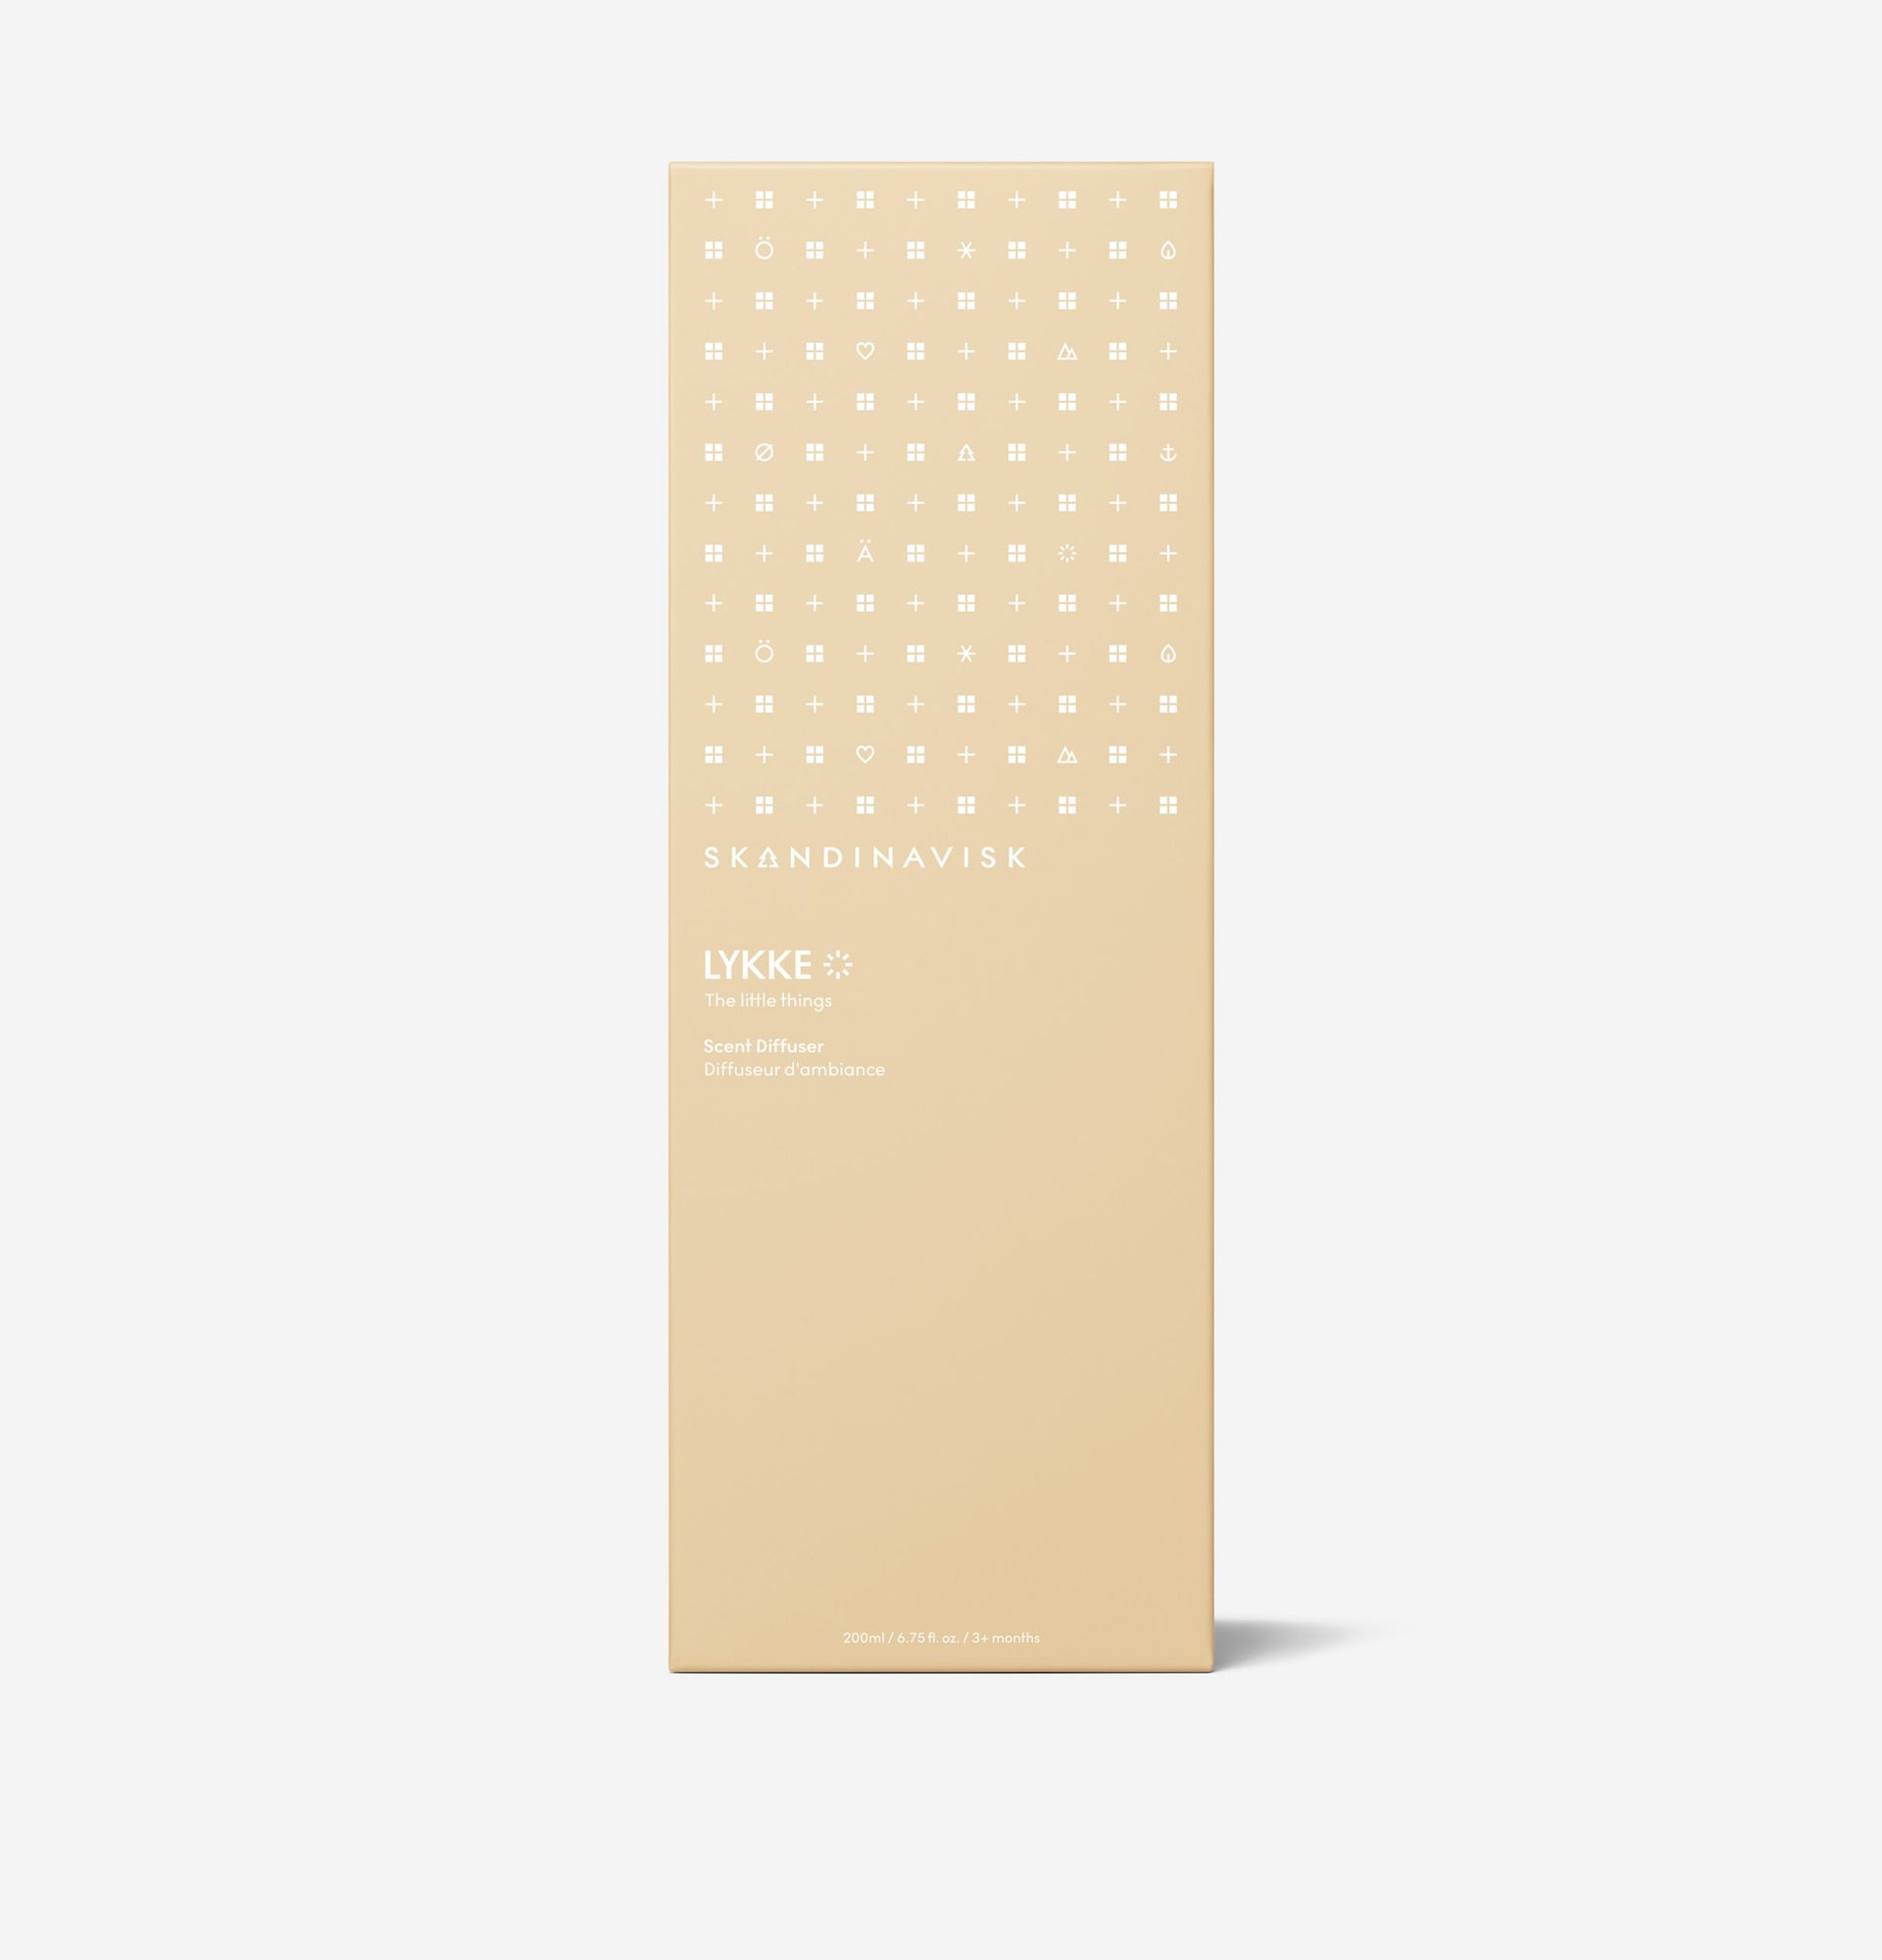 LYKKE Scent Diffuser